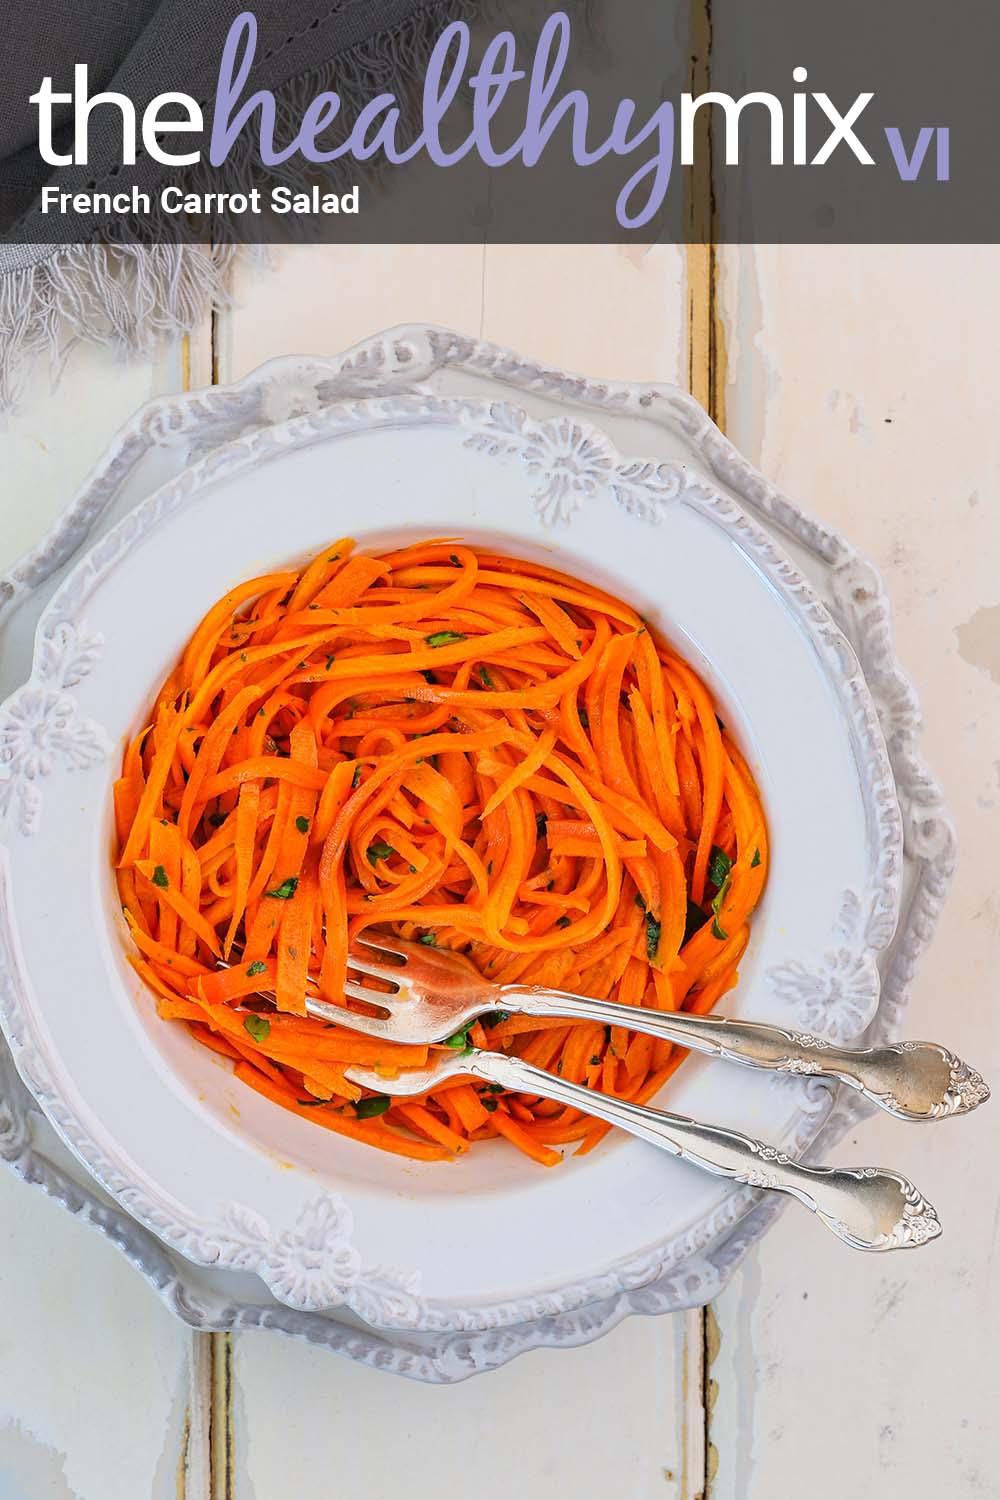 French Carrot Salad THMVI